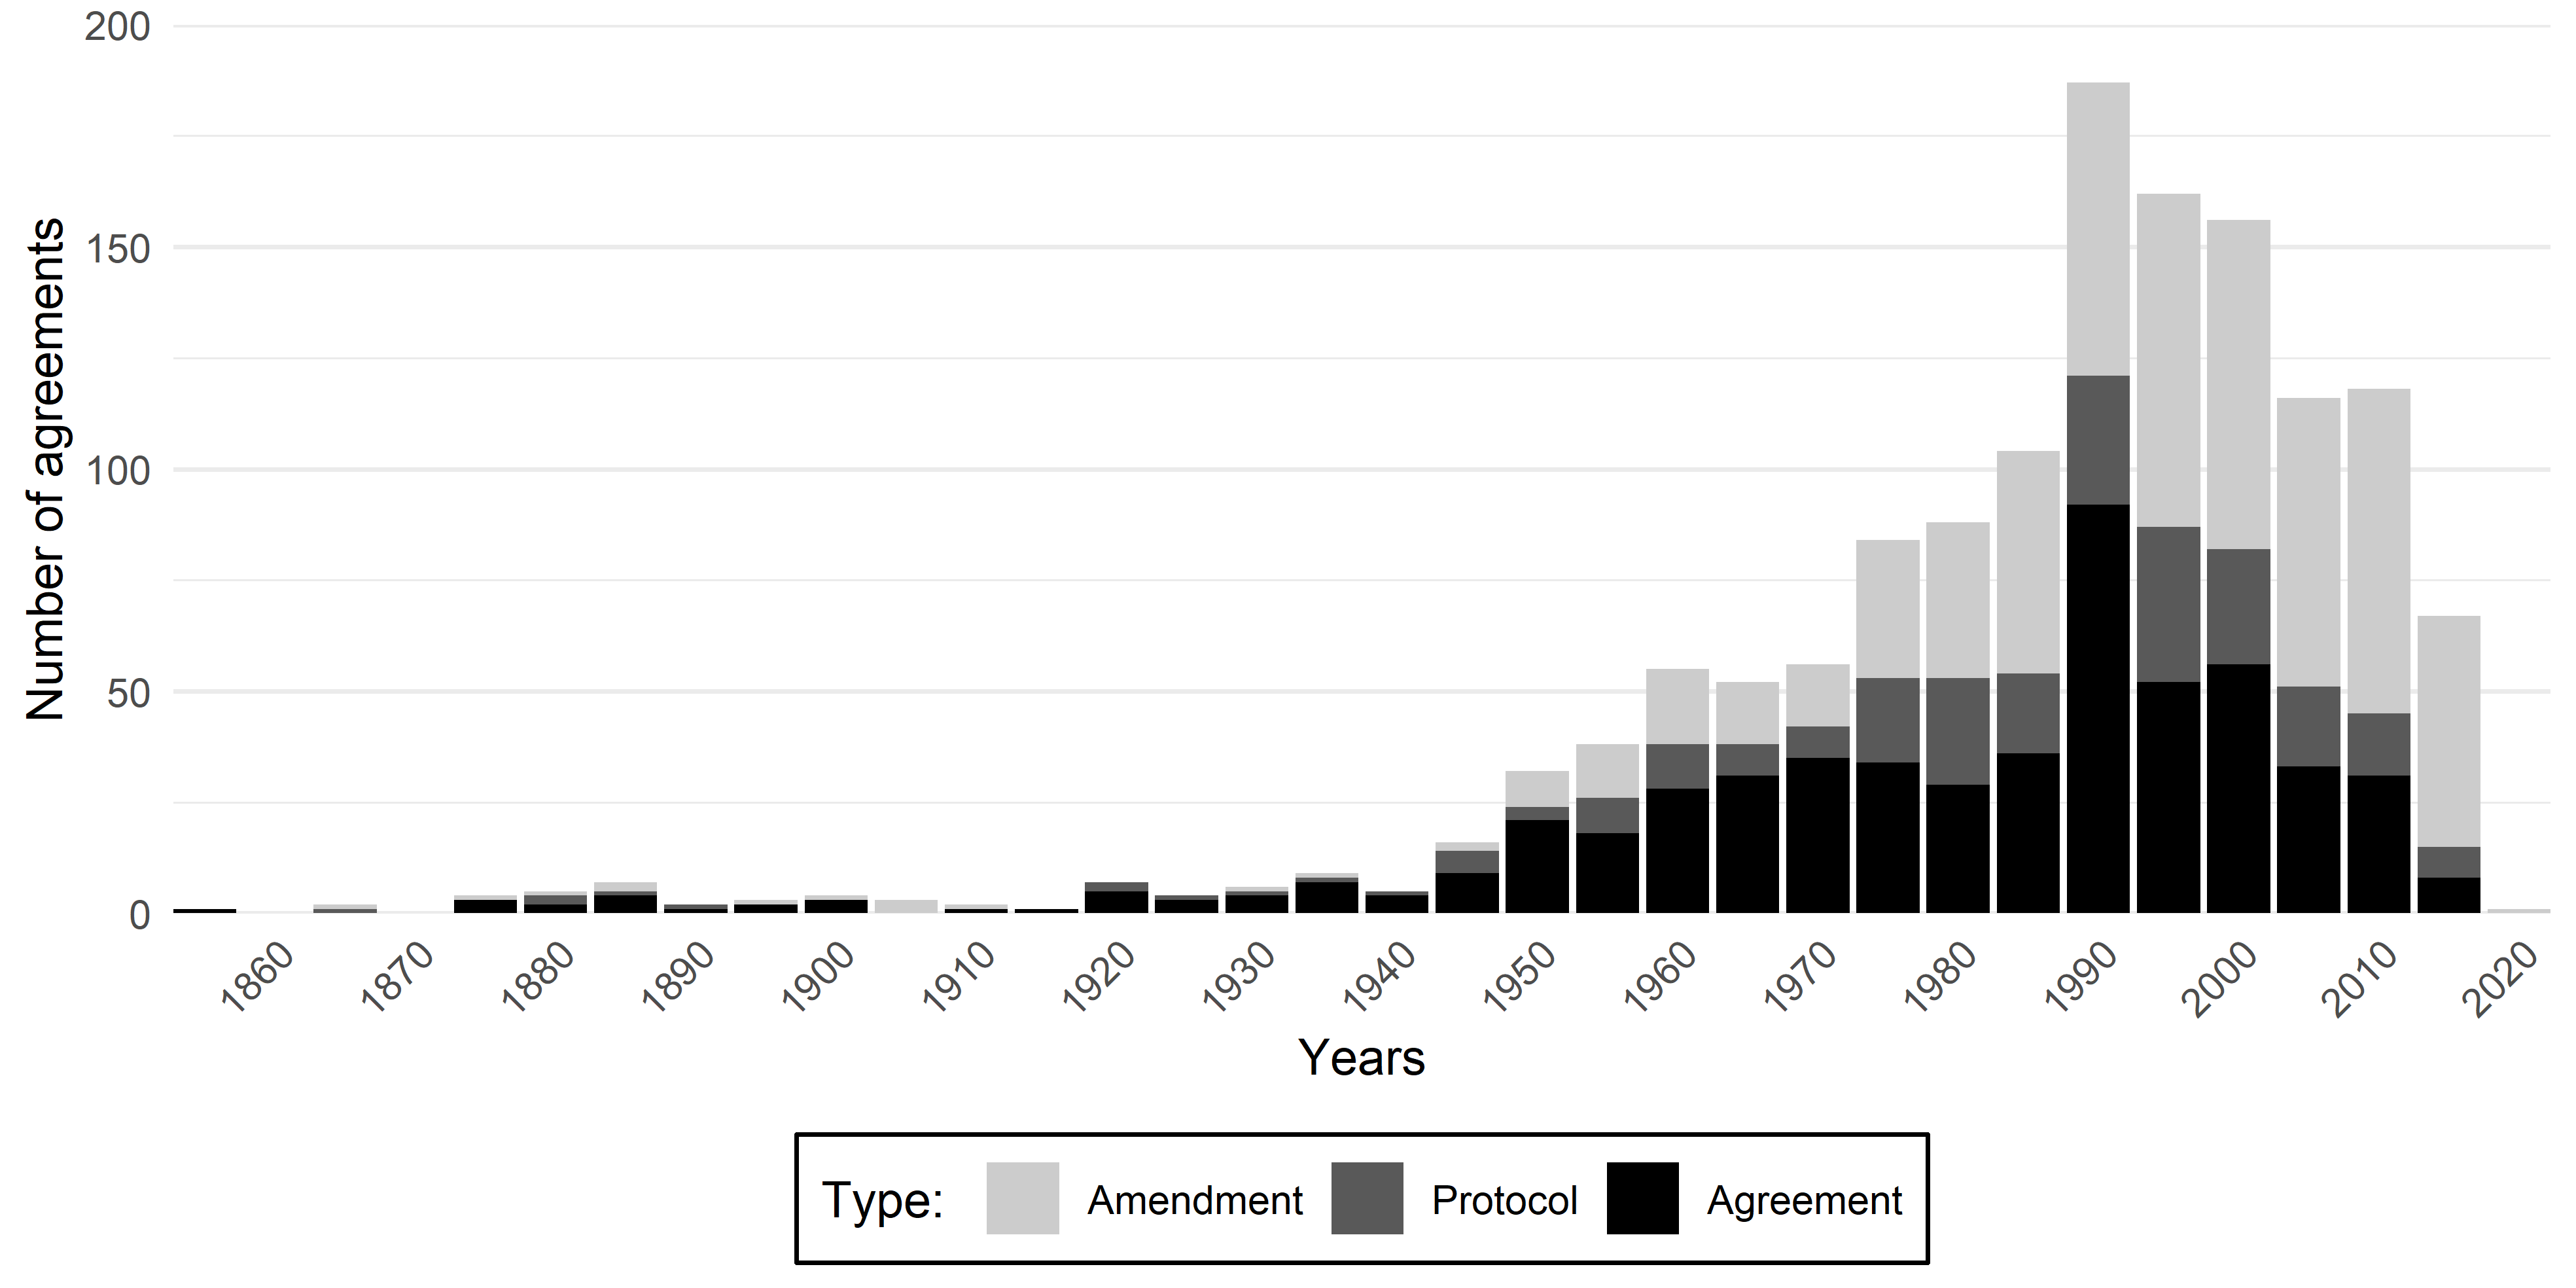 International environmental agreements by year and type<br>Data source: IEA Database Project (https://iea.uoregon.edu/)